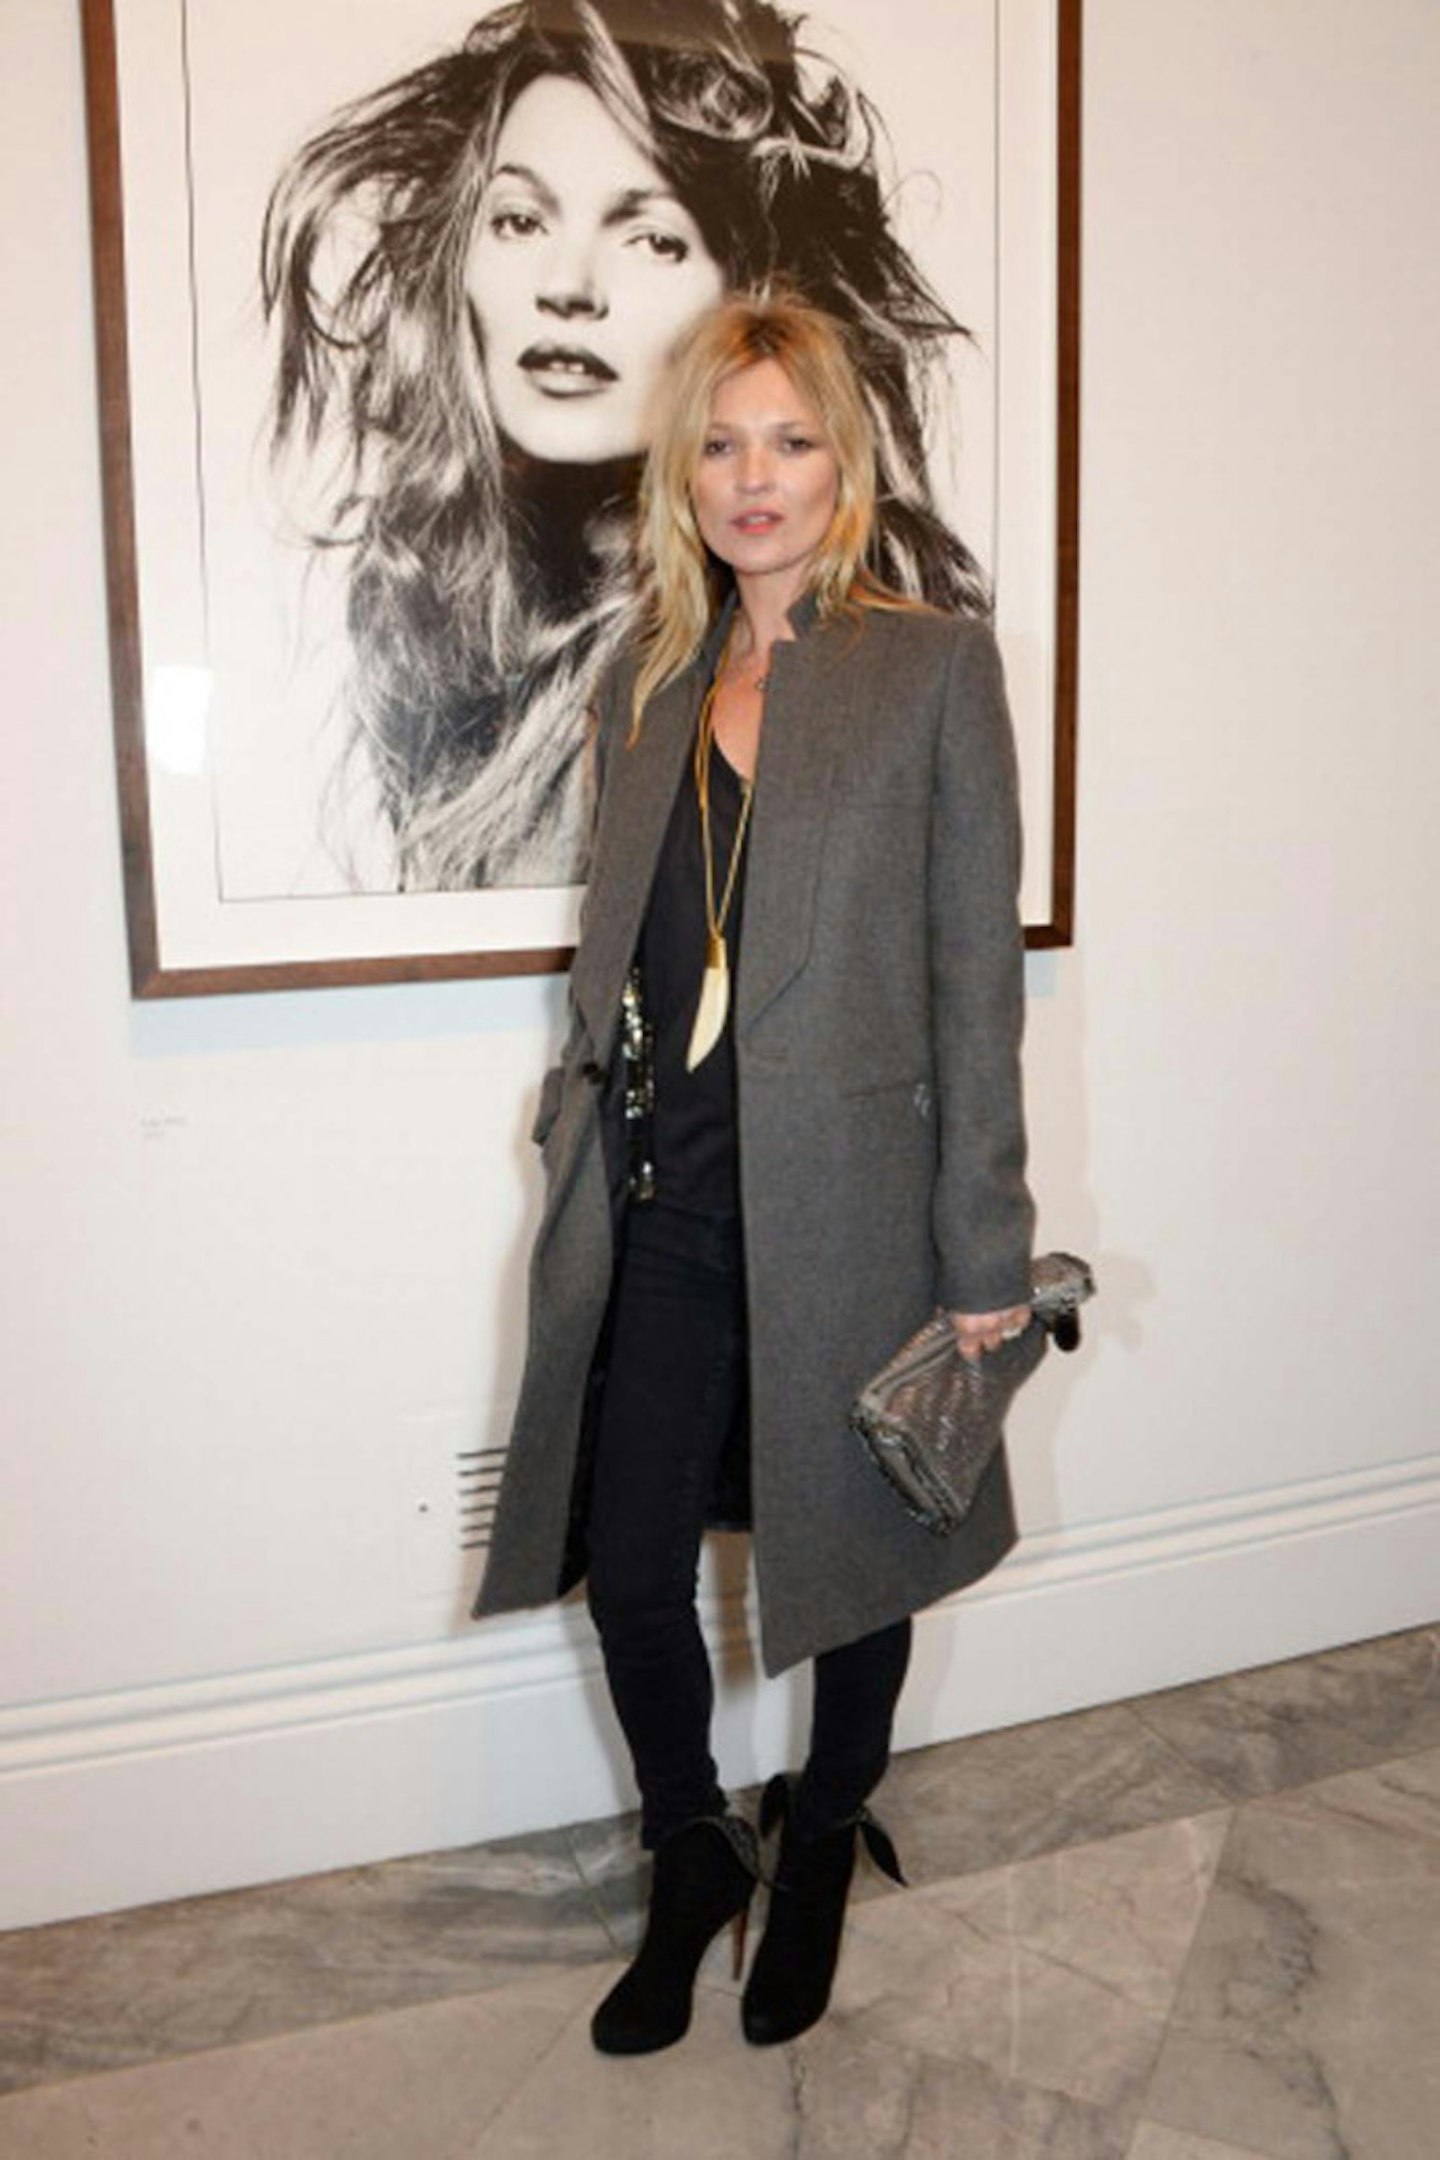 18-Kate Moss attends a private view of Bailey's Stardust, a exhibition of images by David Bailey supported by Hugo Boss, at the National Portrait Gallery on February 3, 2014 in London